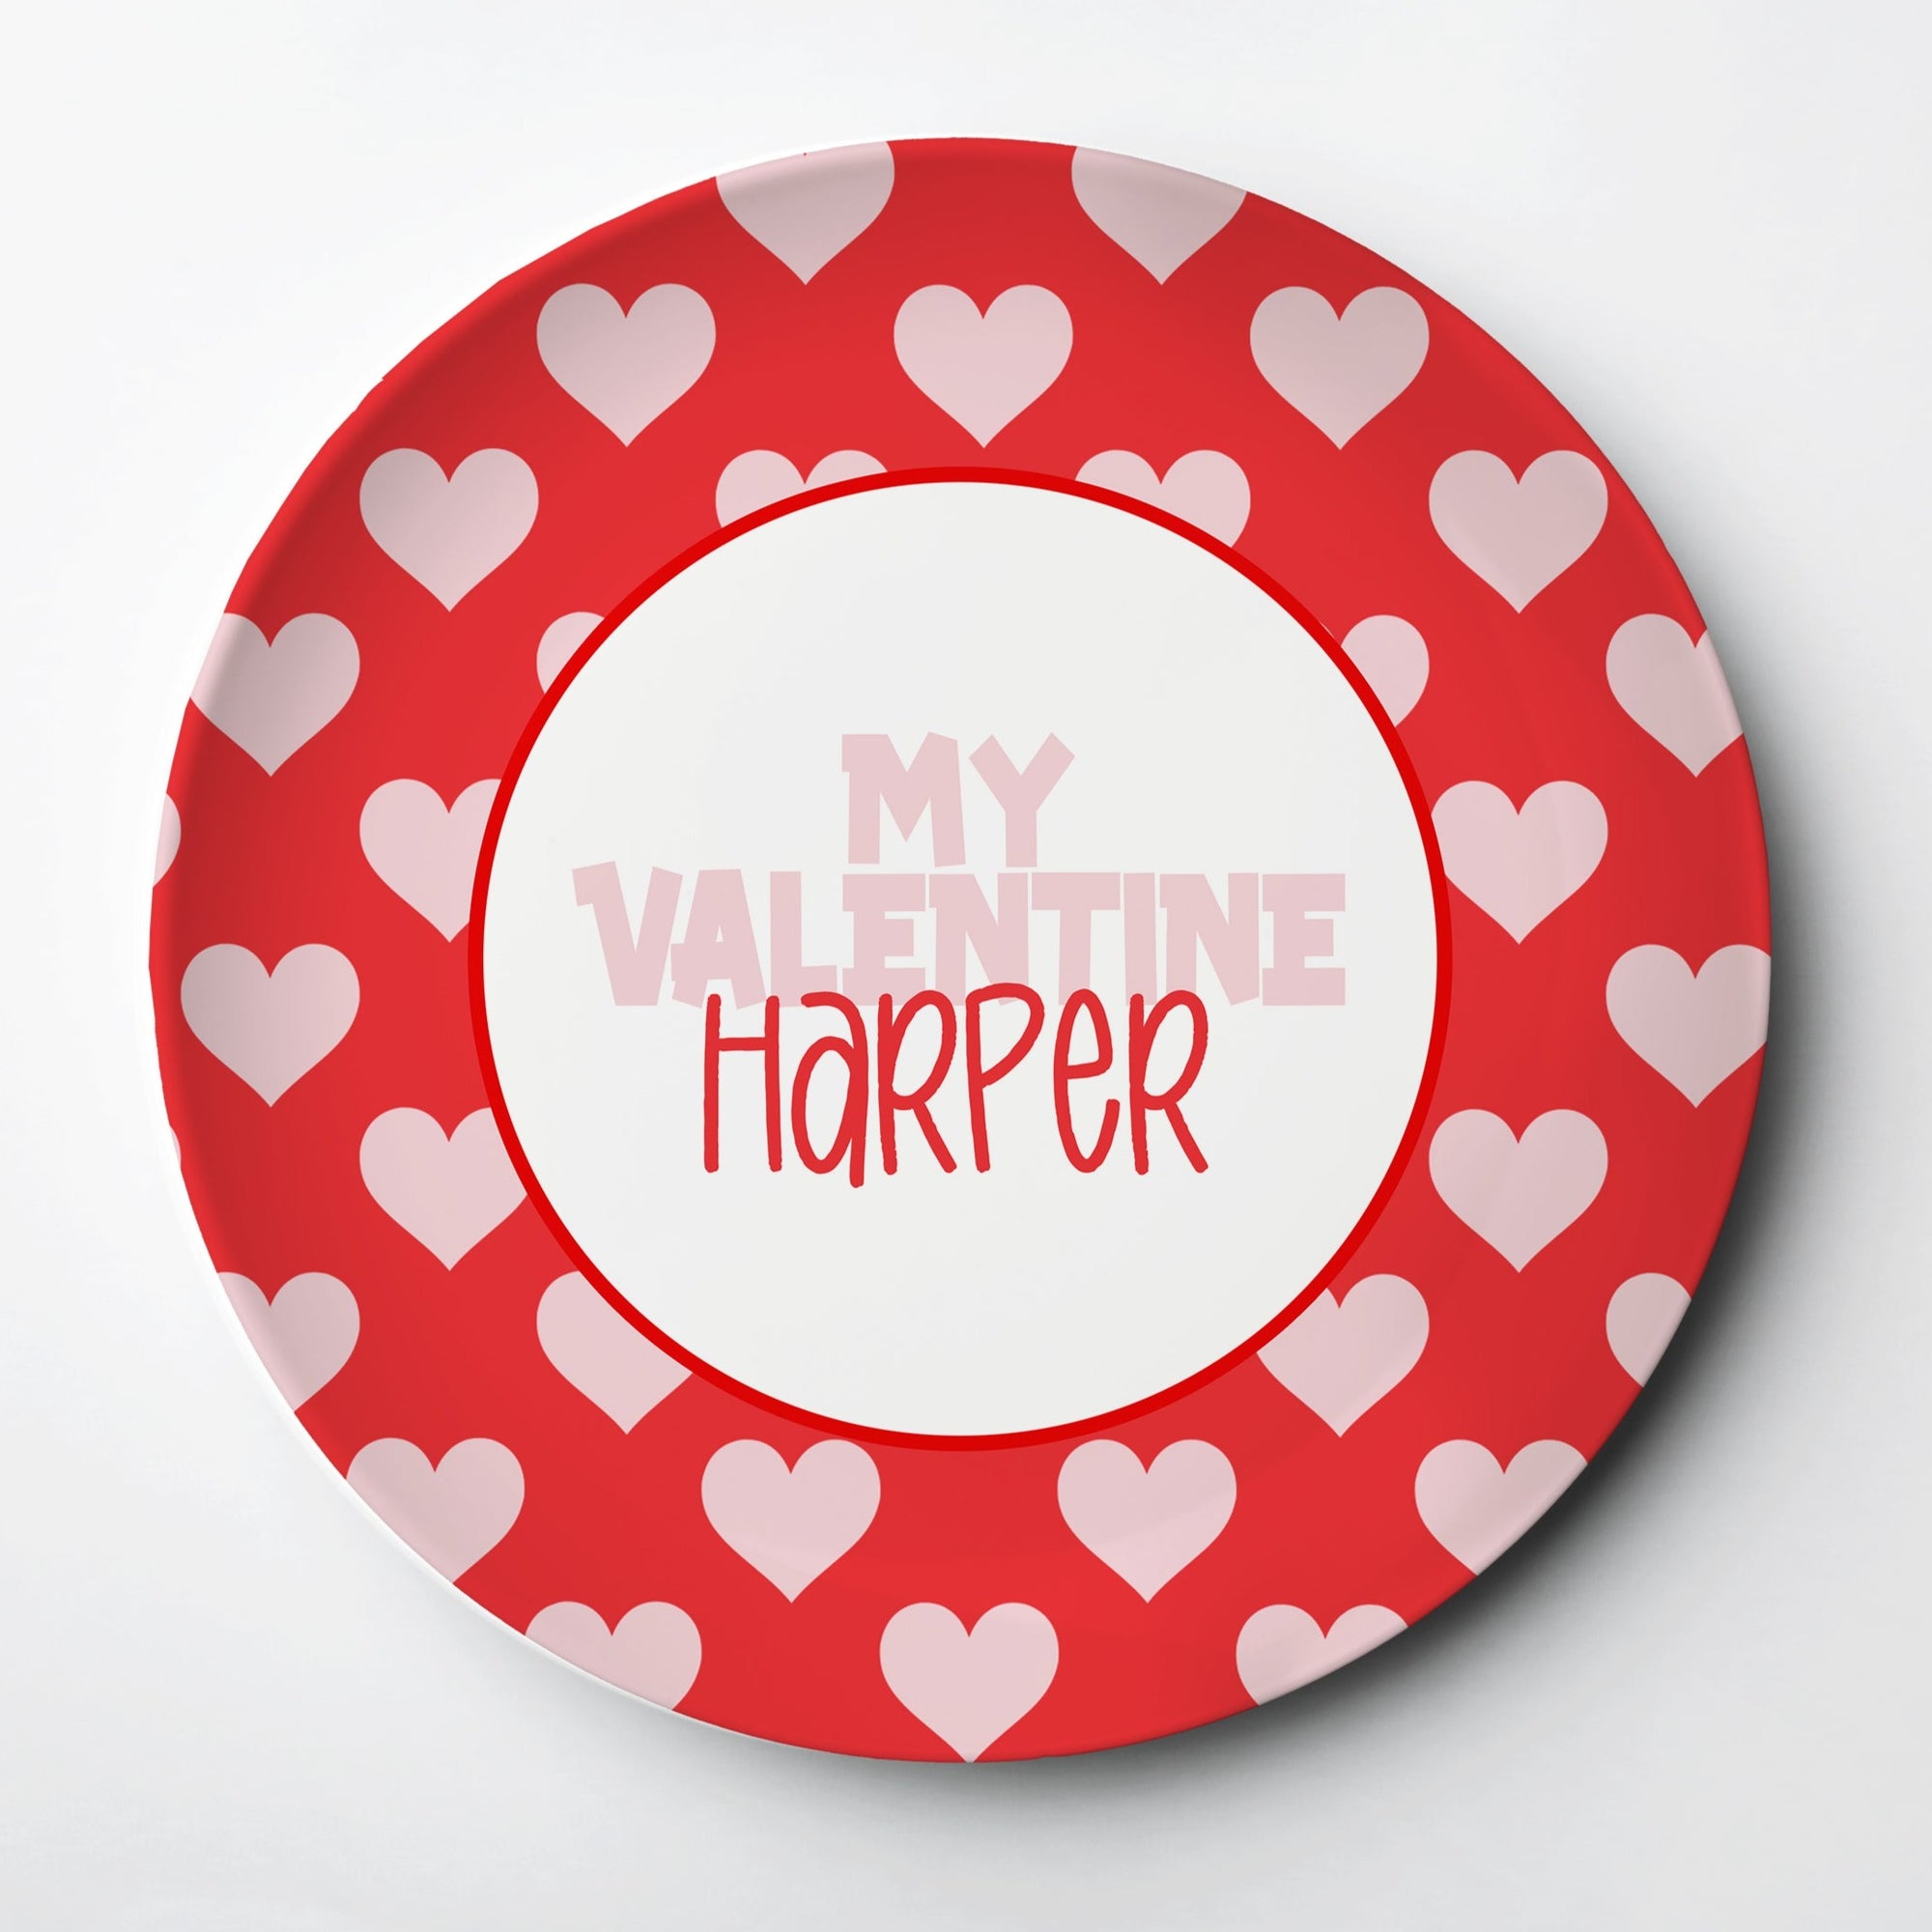 My Valentine - Valentine's Day personalized kids plate.  ThermoSāf® kids reusable plate, microwave, dishwasher and oven safe.  Made in the USA, Pipsy.com